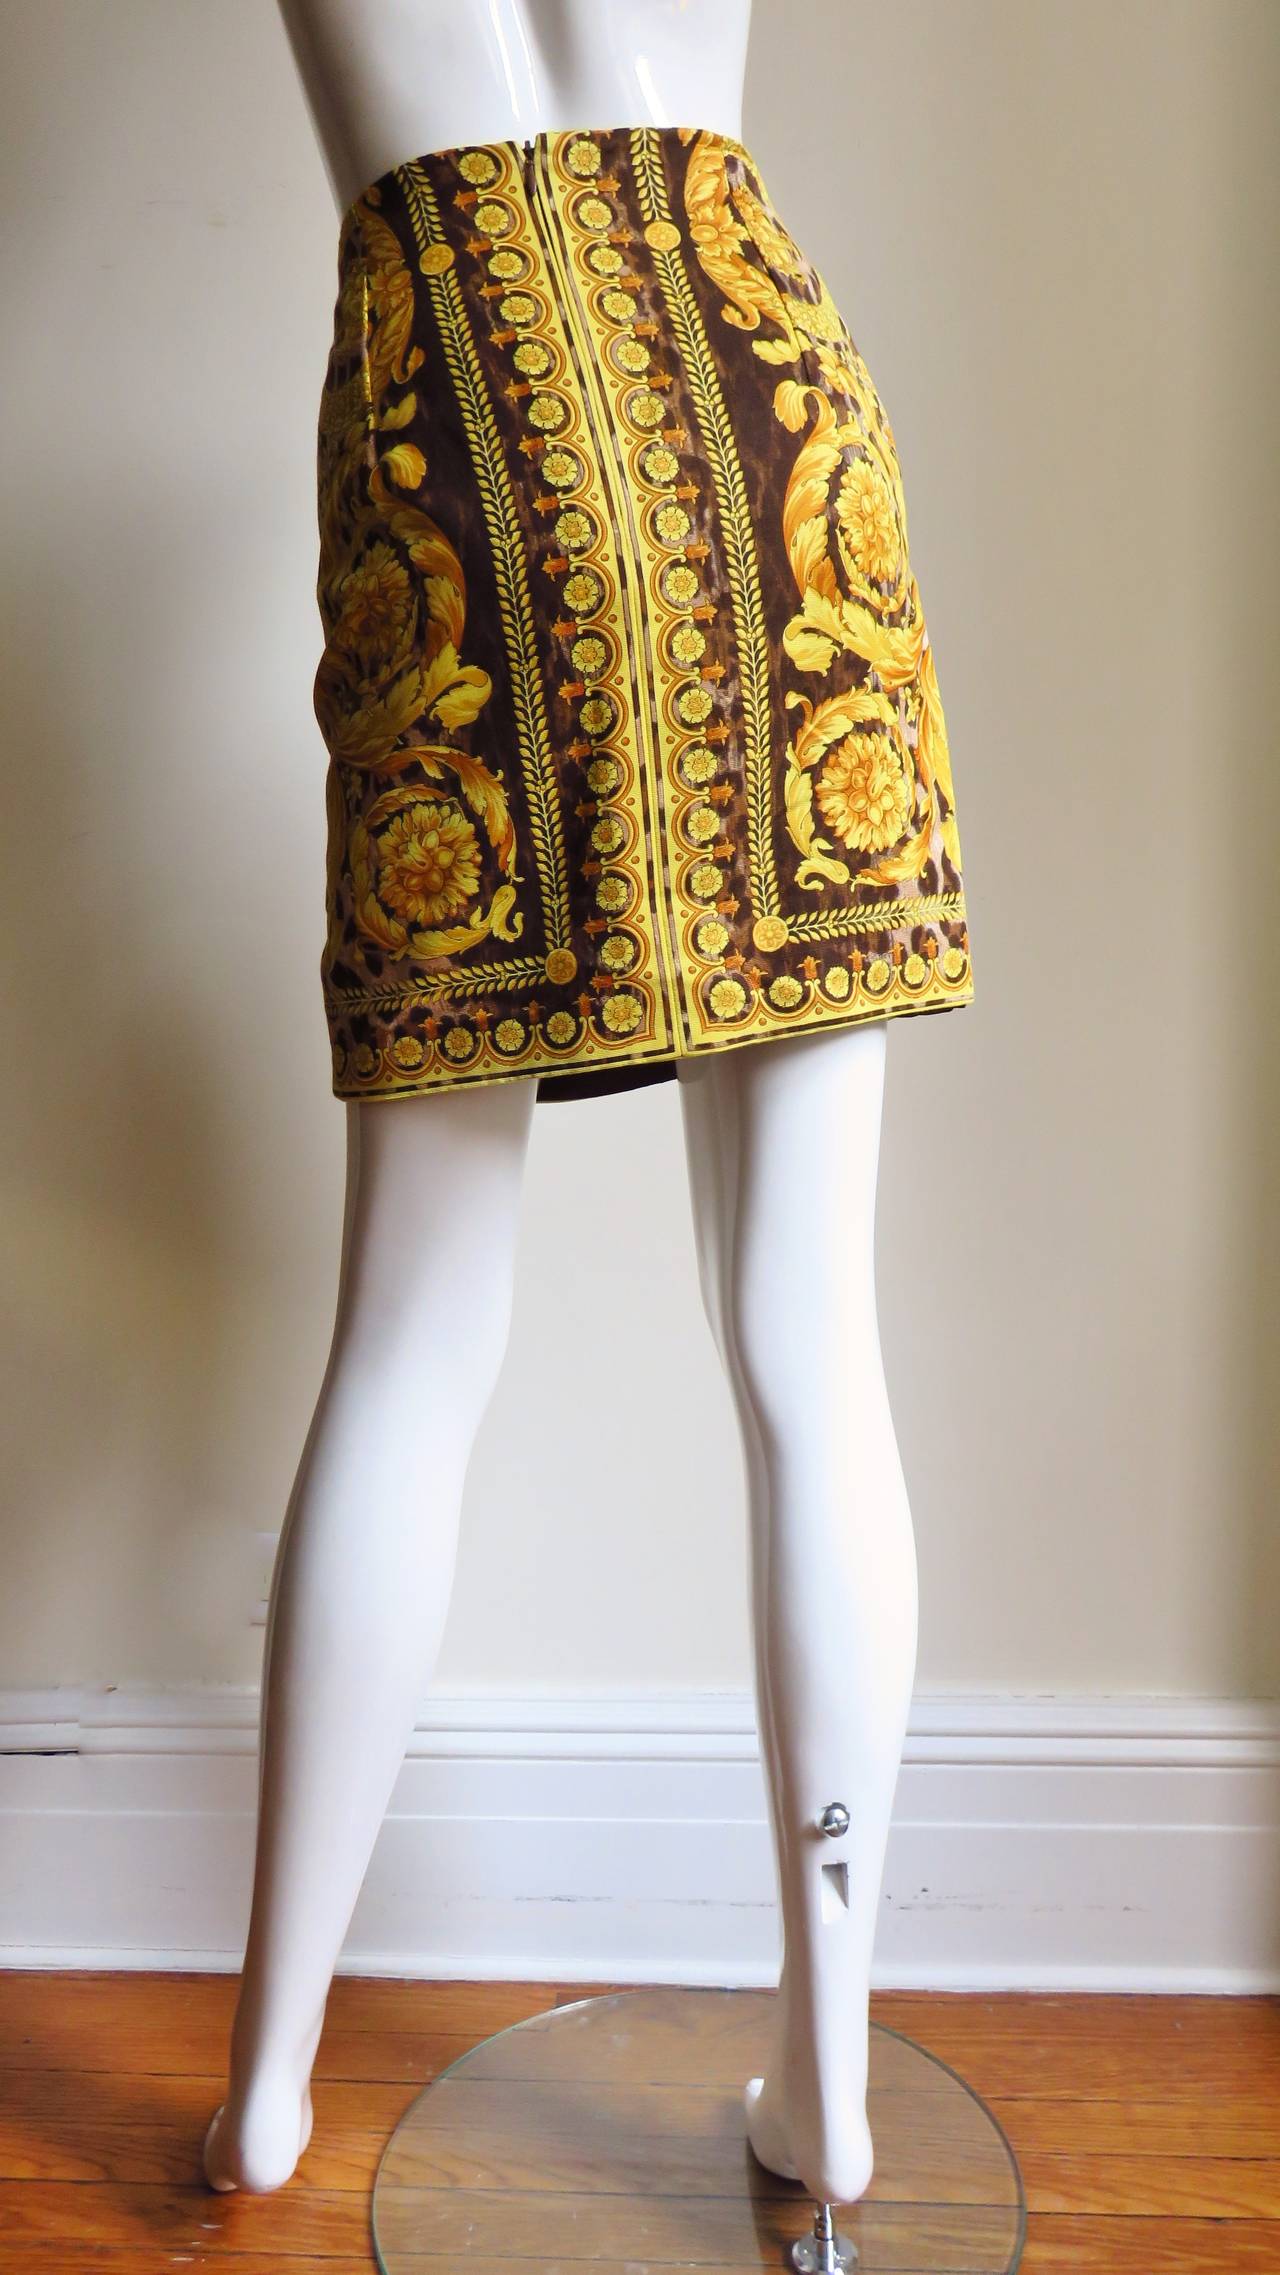  Gianni Versace Couture Leopard Baroque Print Skirt 1990s 4